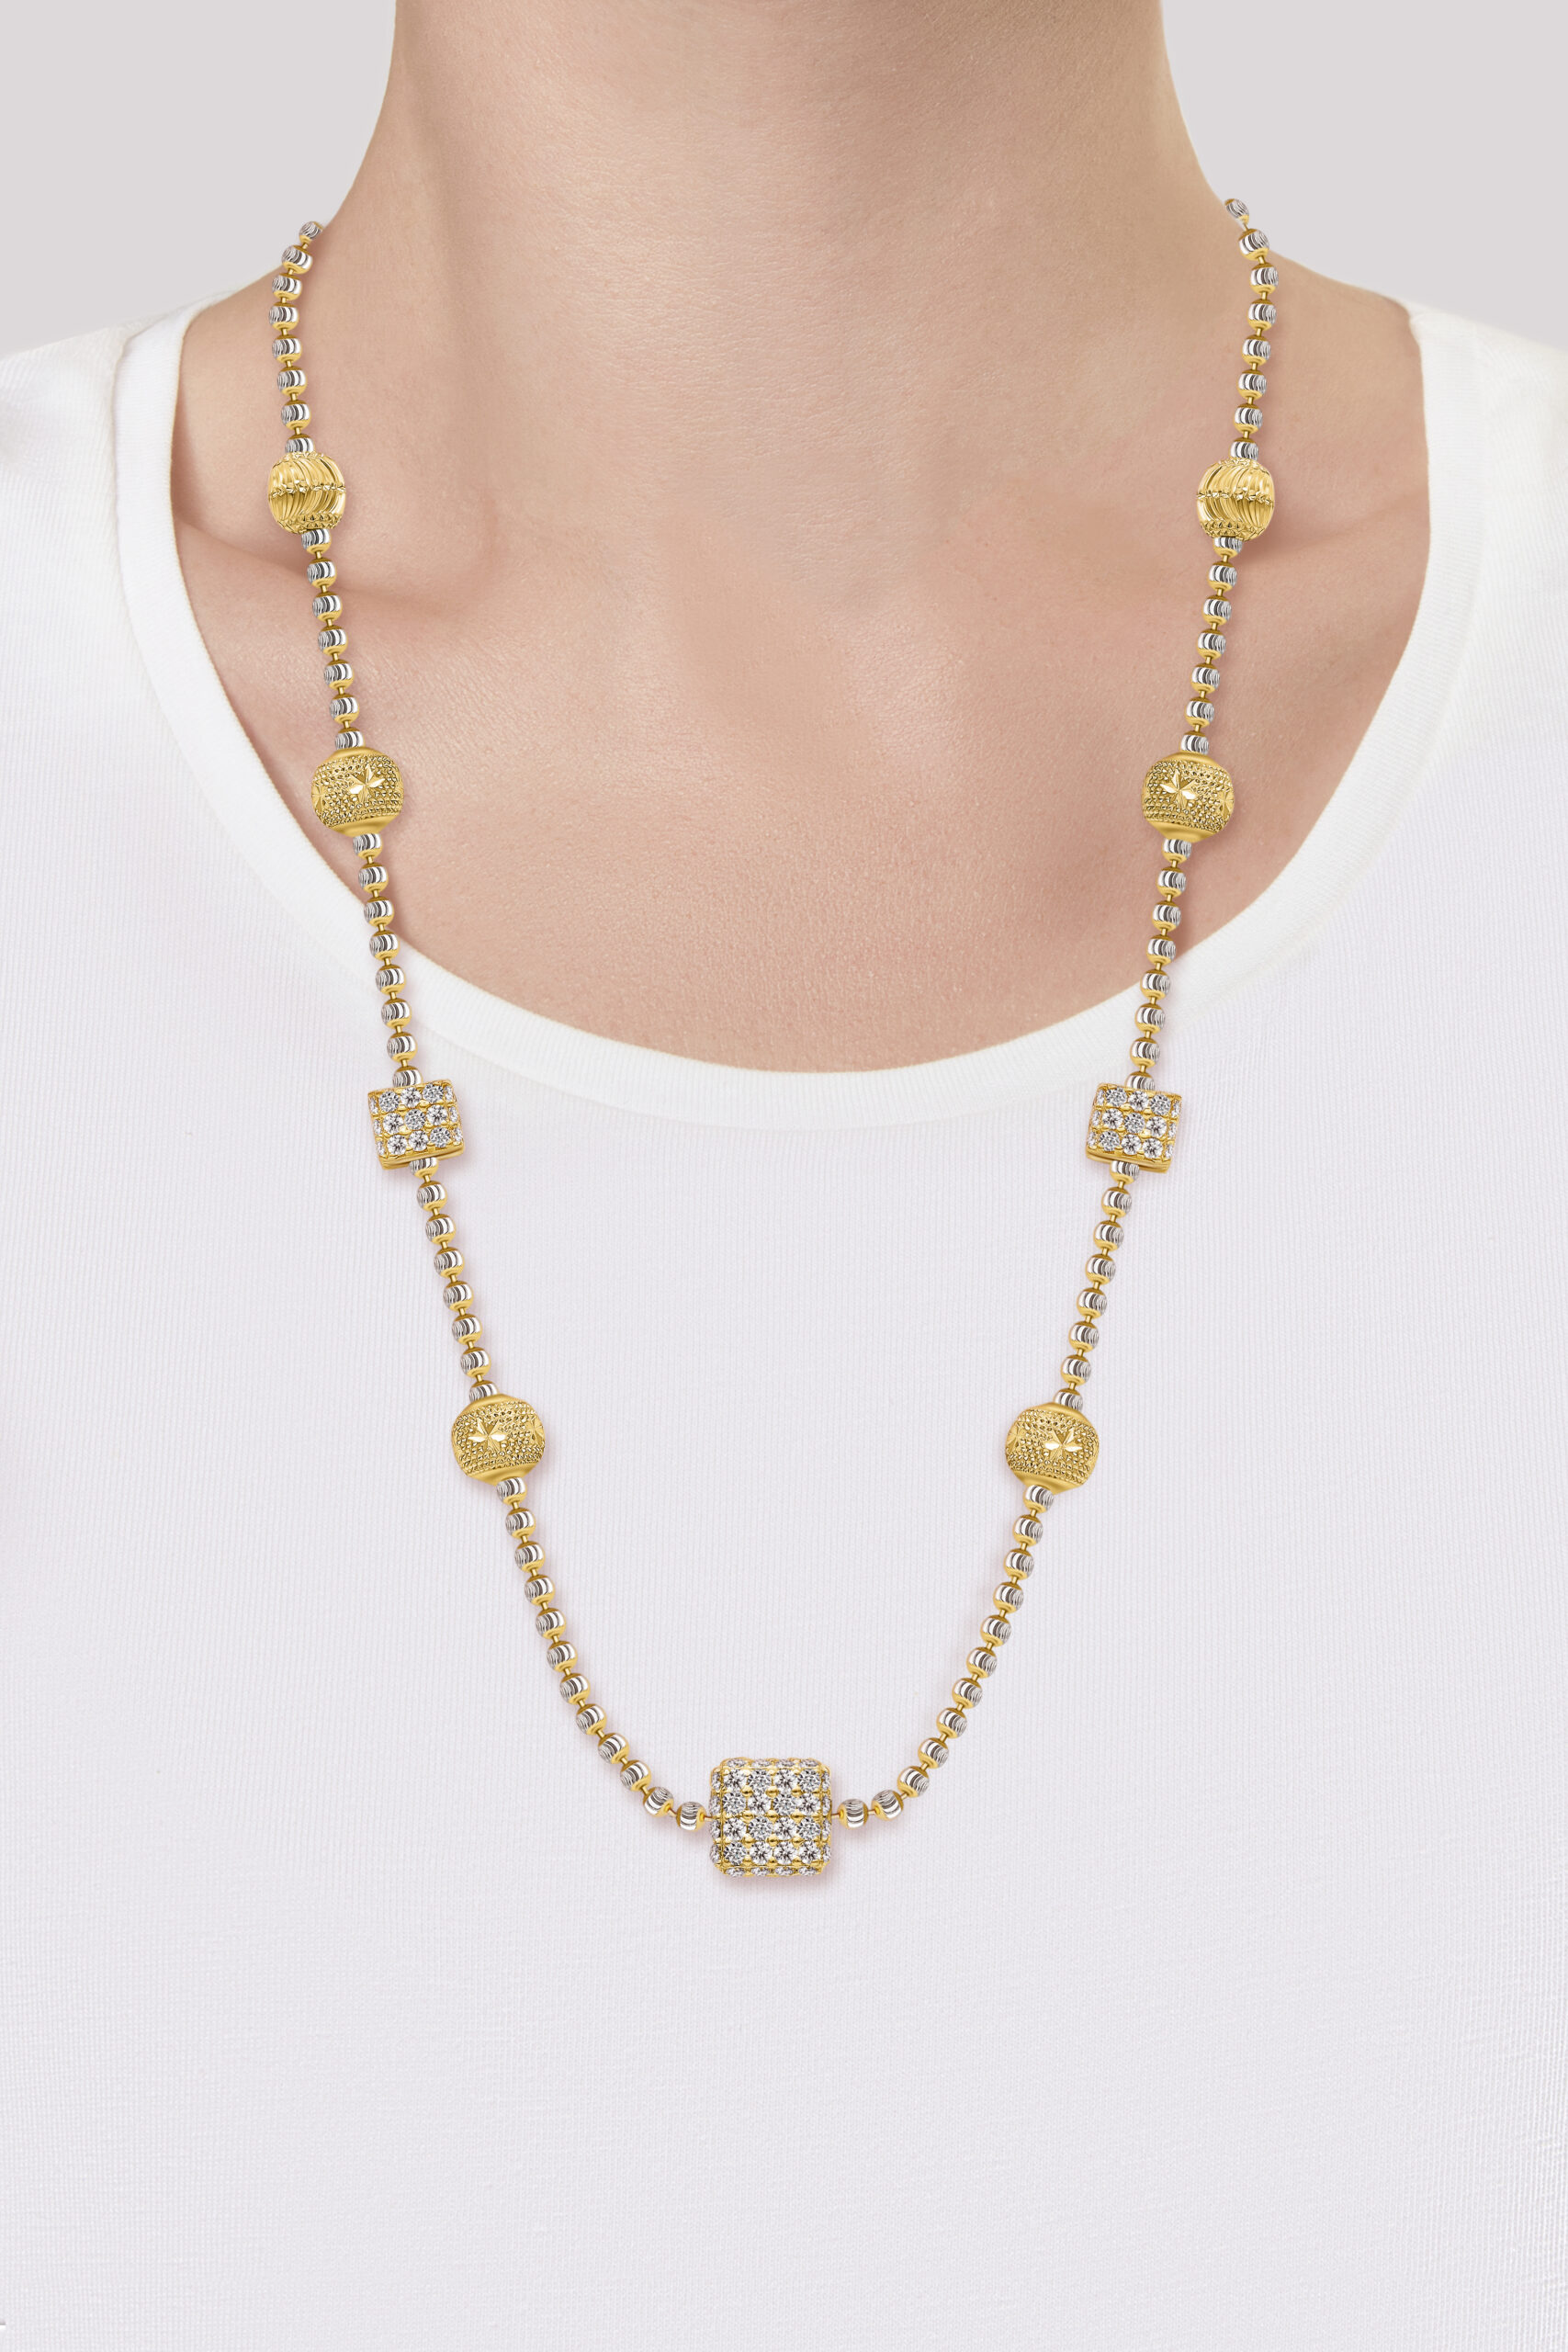 22K Gold Ball Necklace (13.25G)